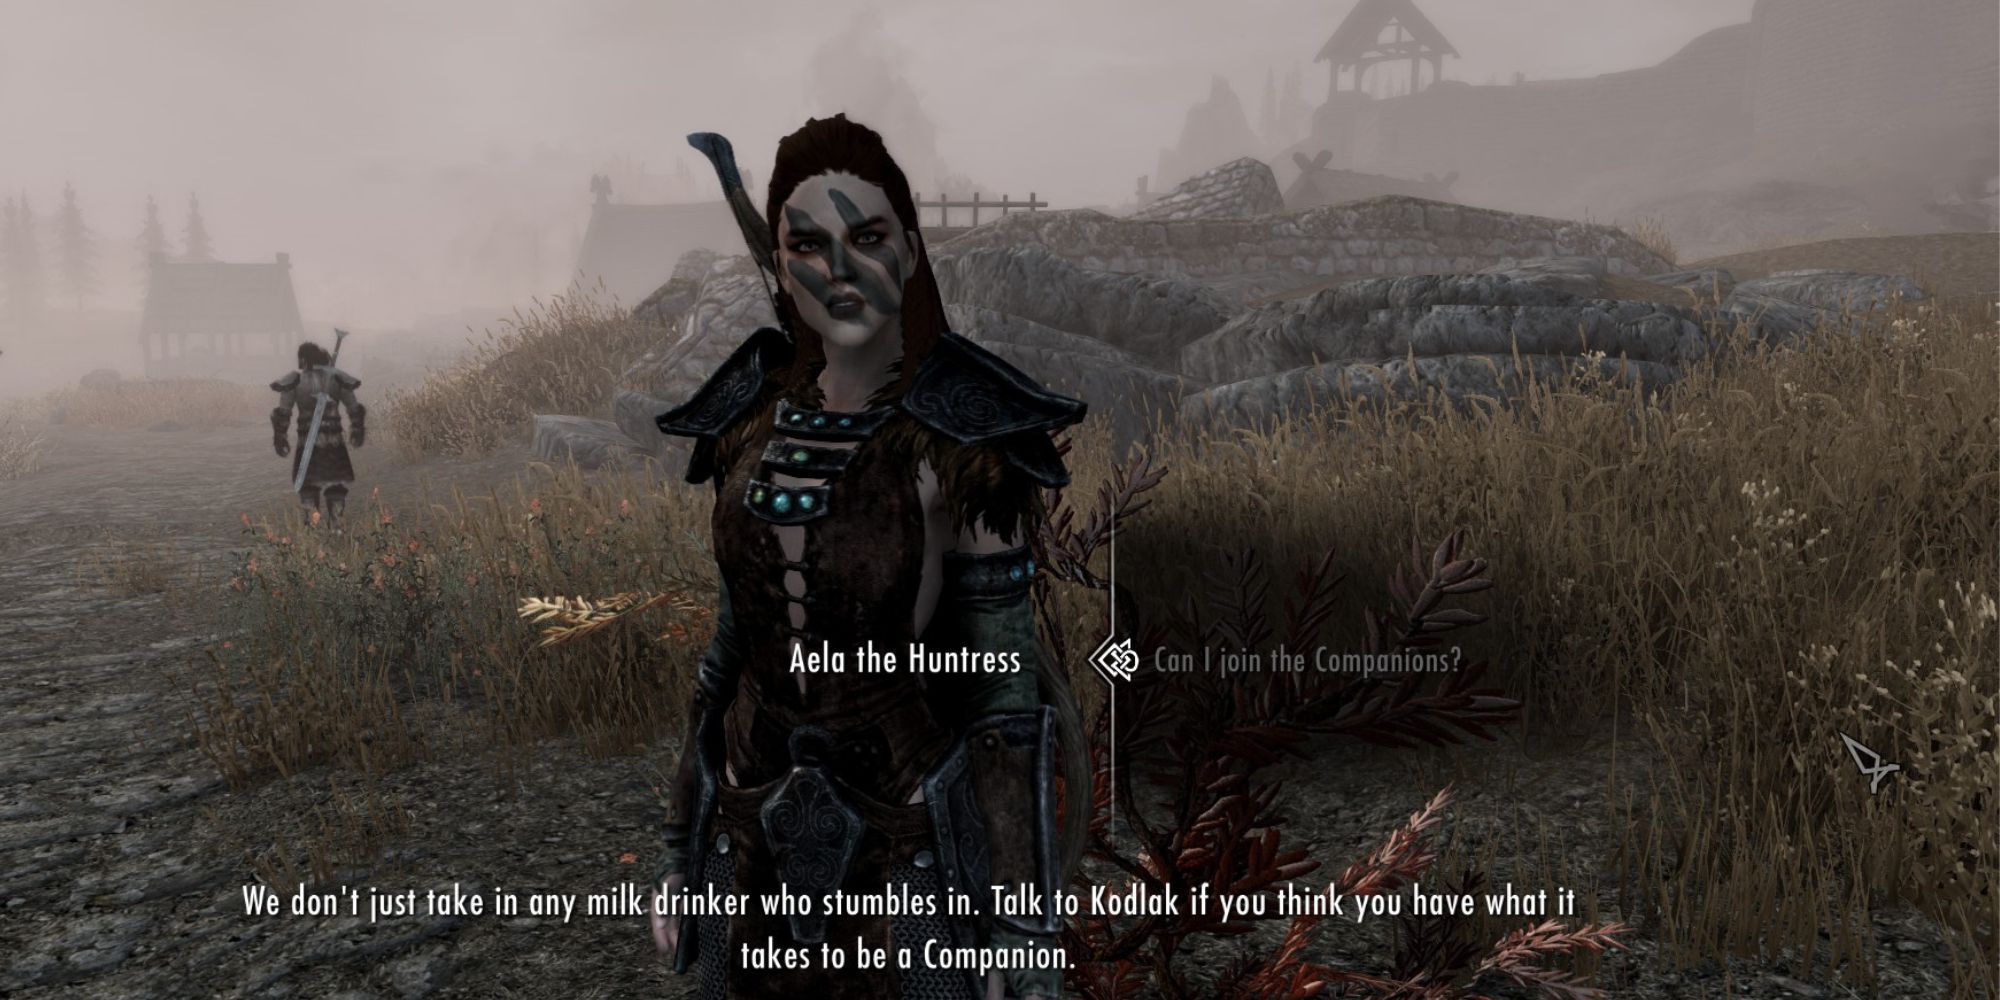 Aela the Huntress speaks to a player outside of Whiterun about joining the Companions